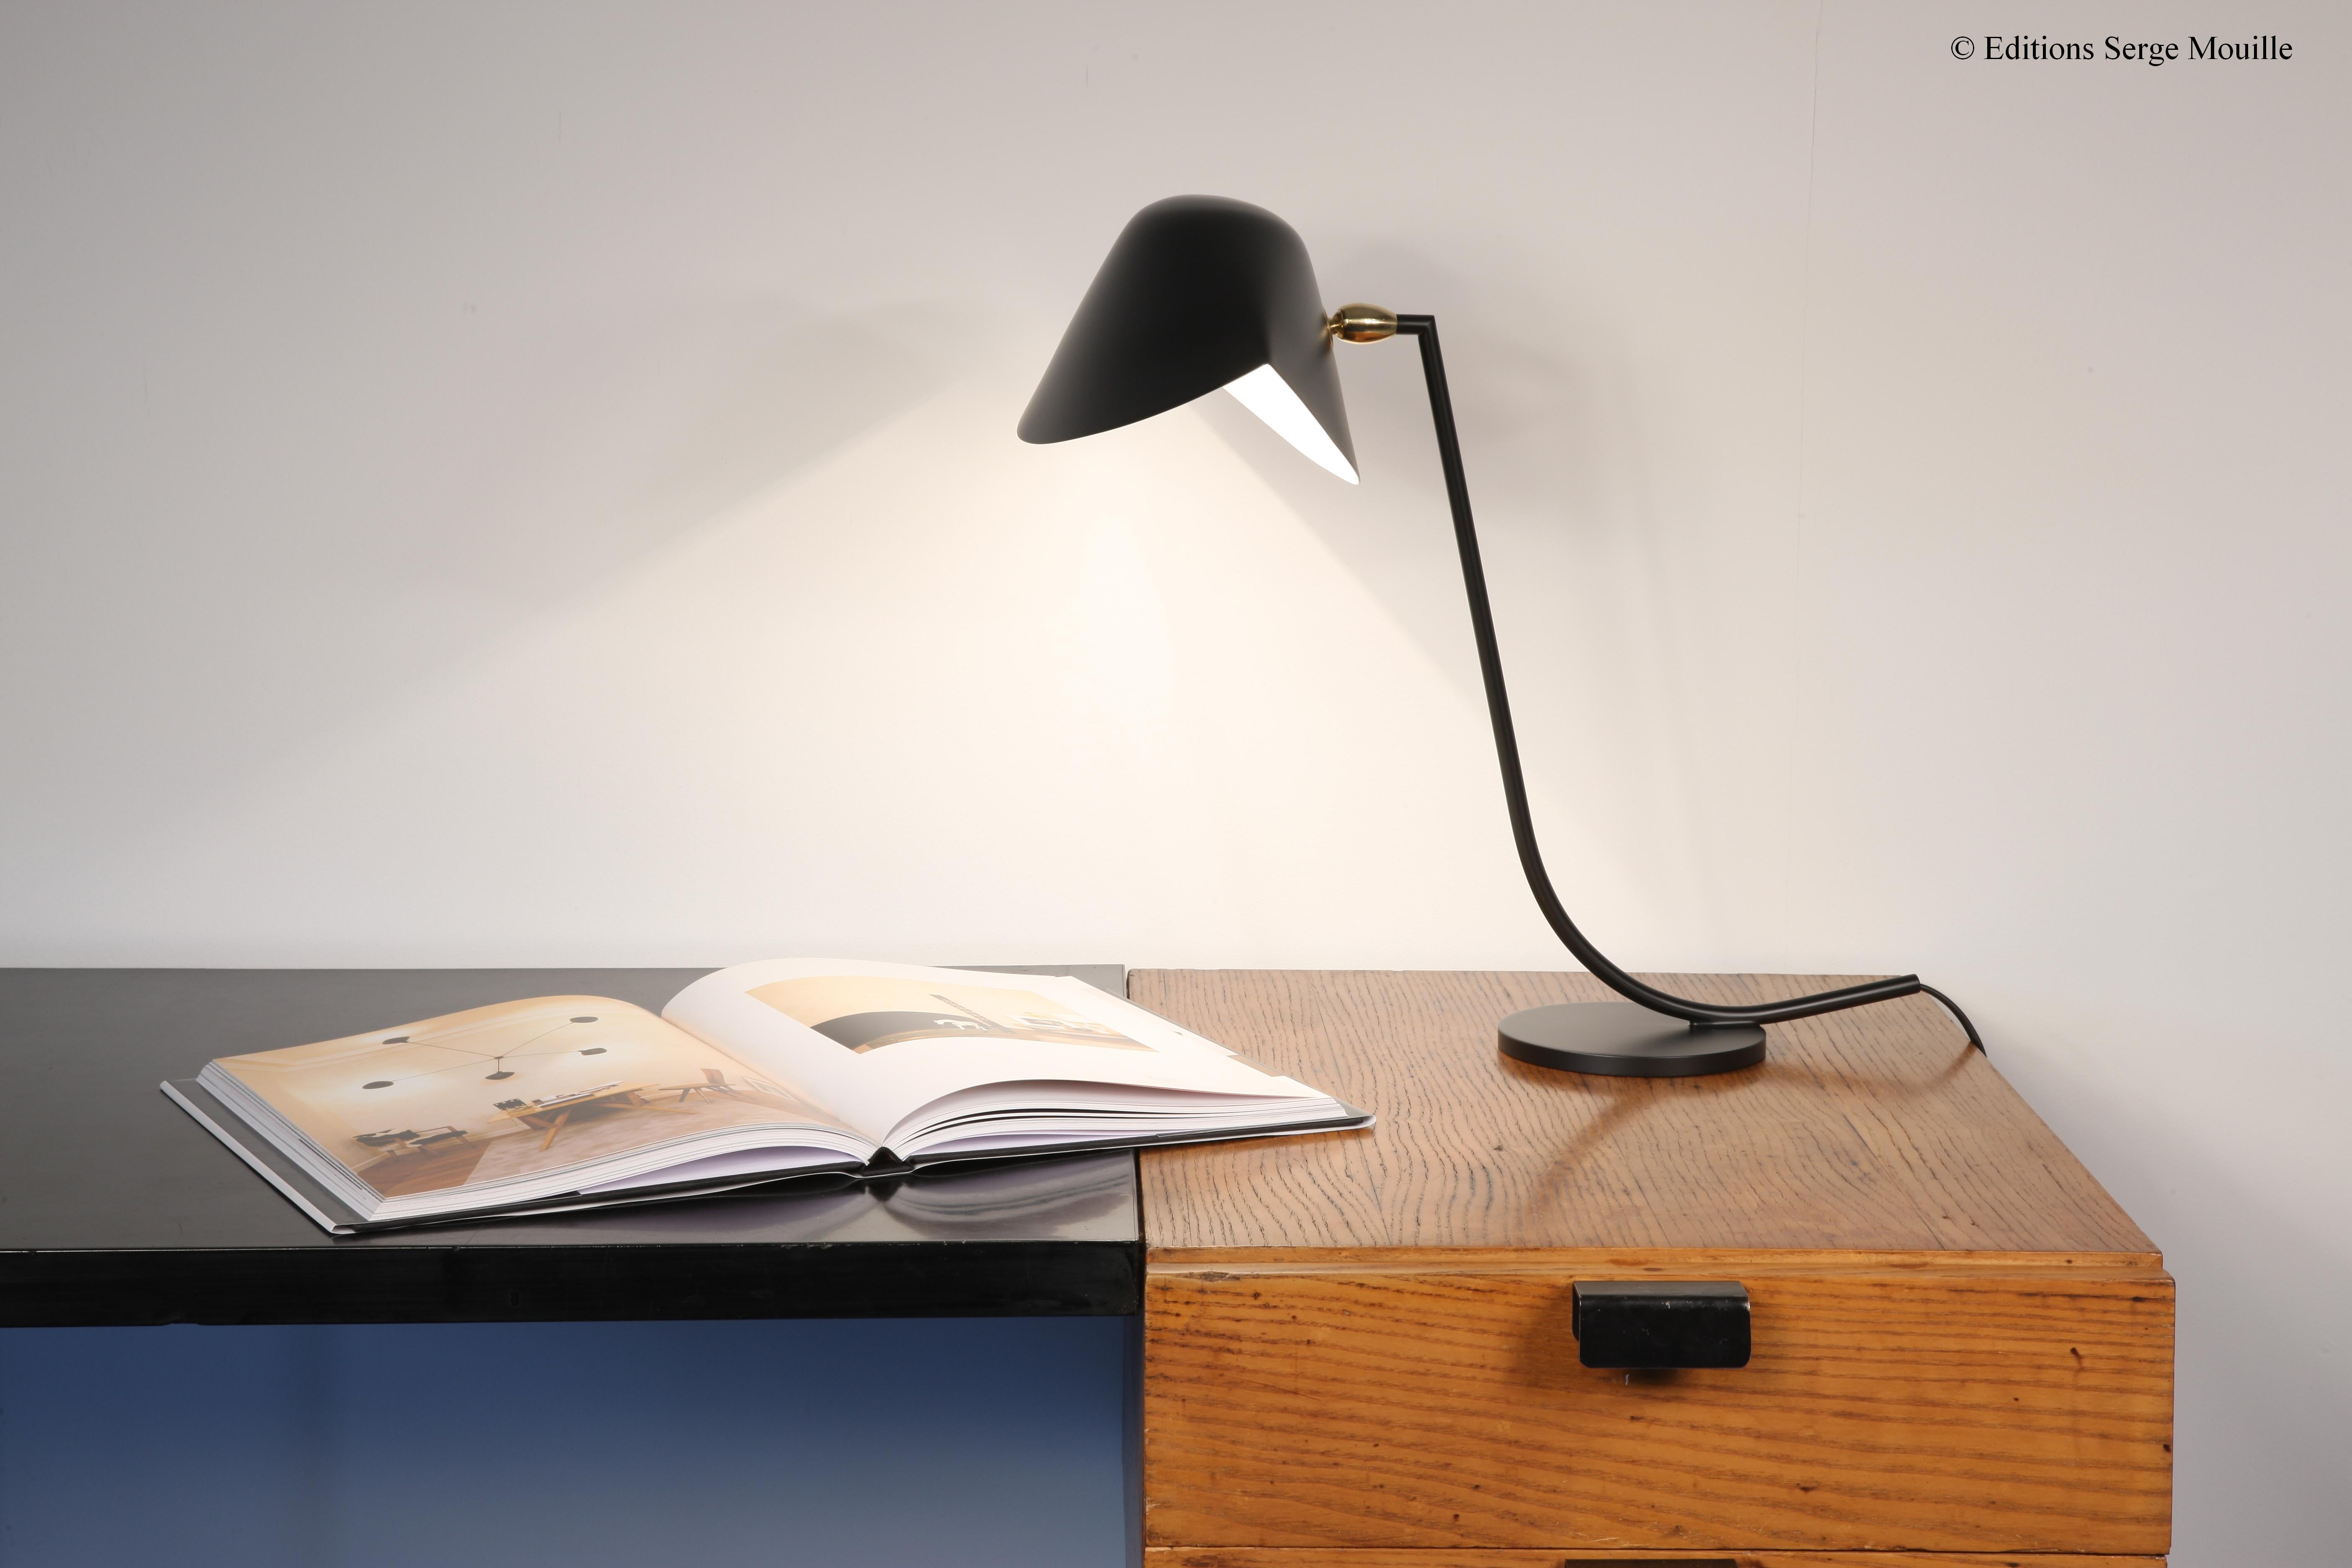 Serge Mouille 'Antony' table lamp in black.

Originally designed in 1955, this iconic lamp is still made by Edition Serge Mouille in France using many of the same small-scale manufacturing techniques and scrupulous attention to detail, materials